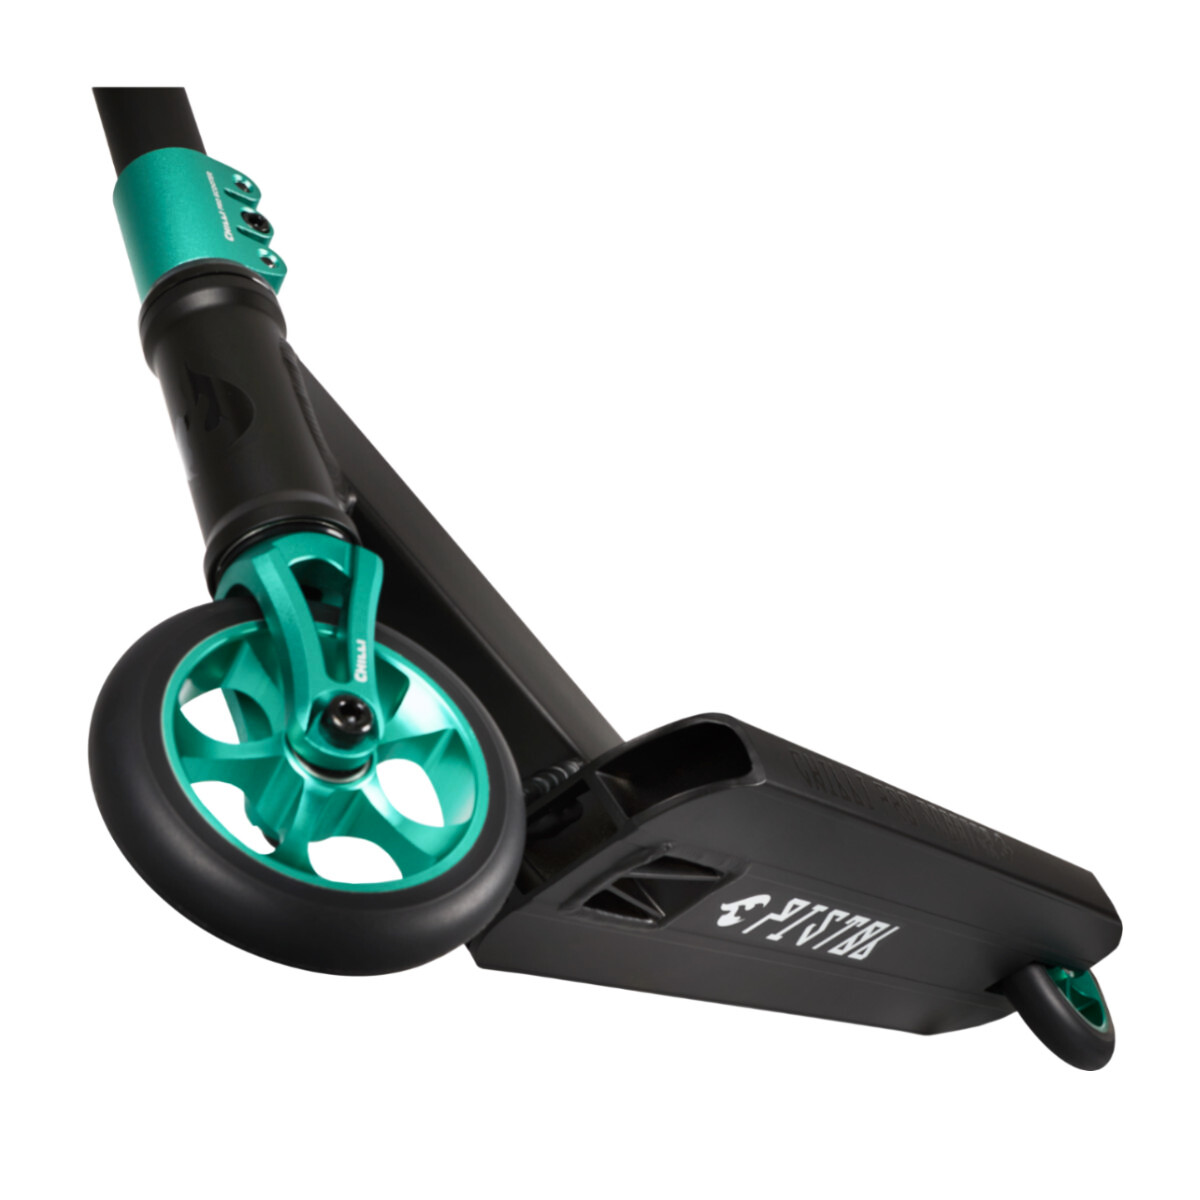 Freestyle Stunt-Scooter Chilli Pro Scooter  Reaper Reloaded Pistol Petrol